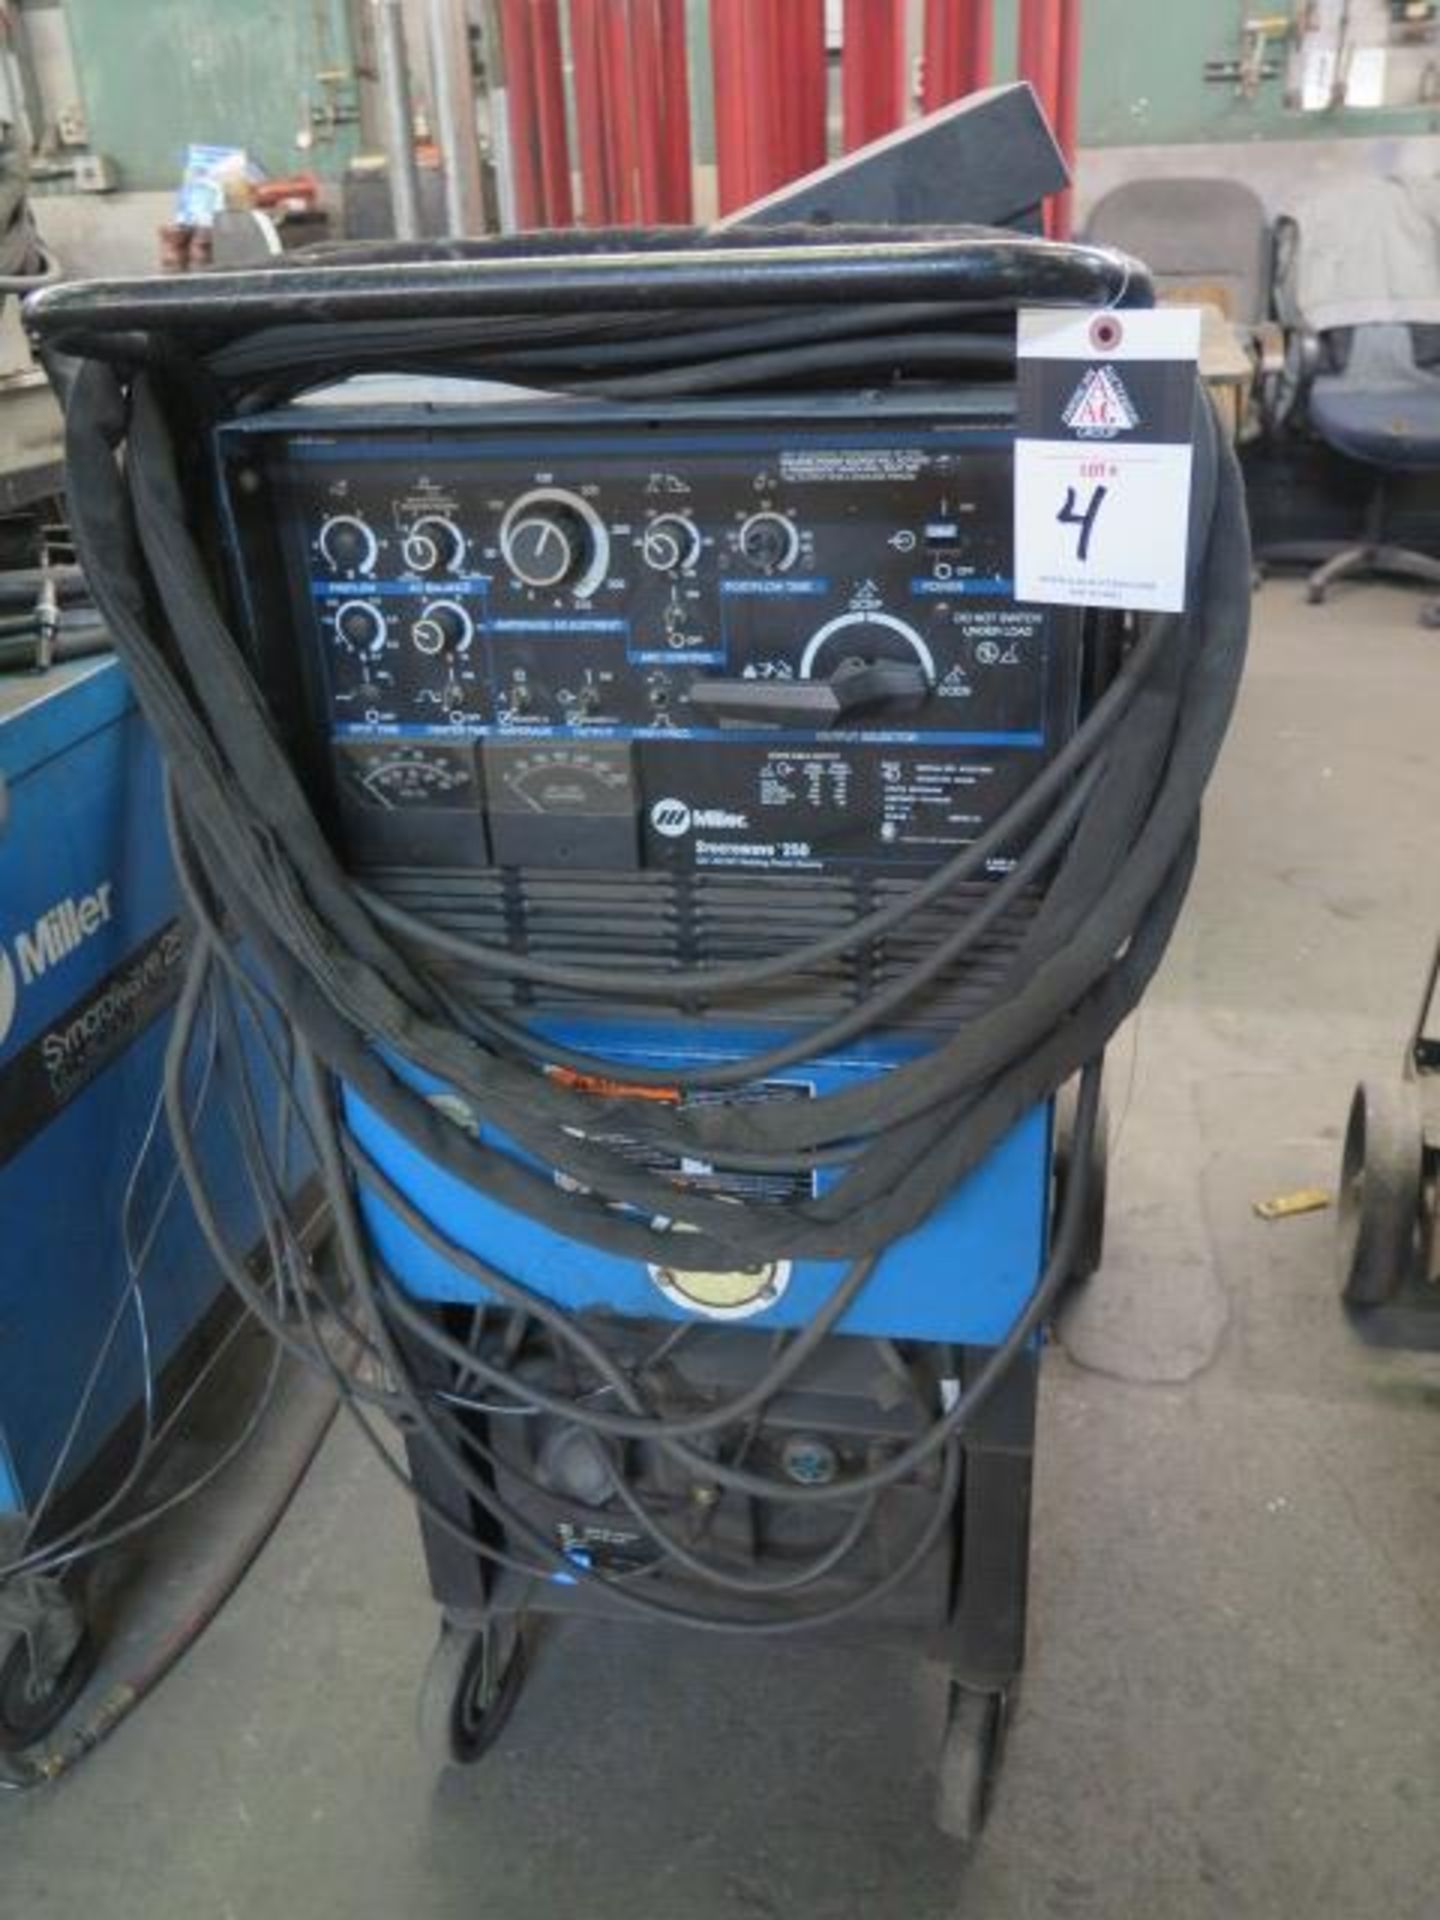 Miller Syncrowave 250 CC-AC/DC Arc Welding Power Source s/n KK257806. w/Cooler Cart SOLD AS-IS